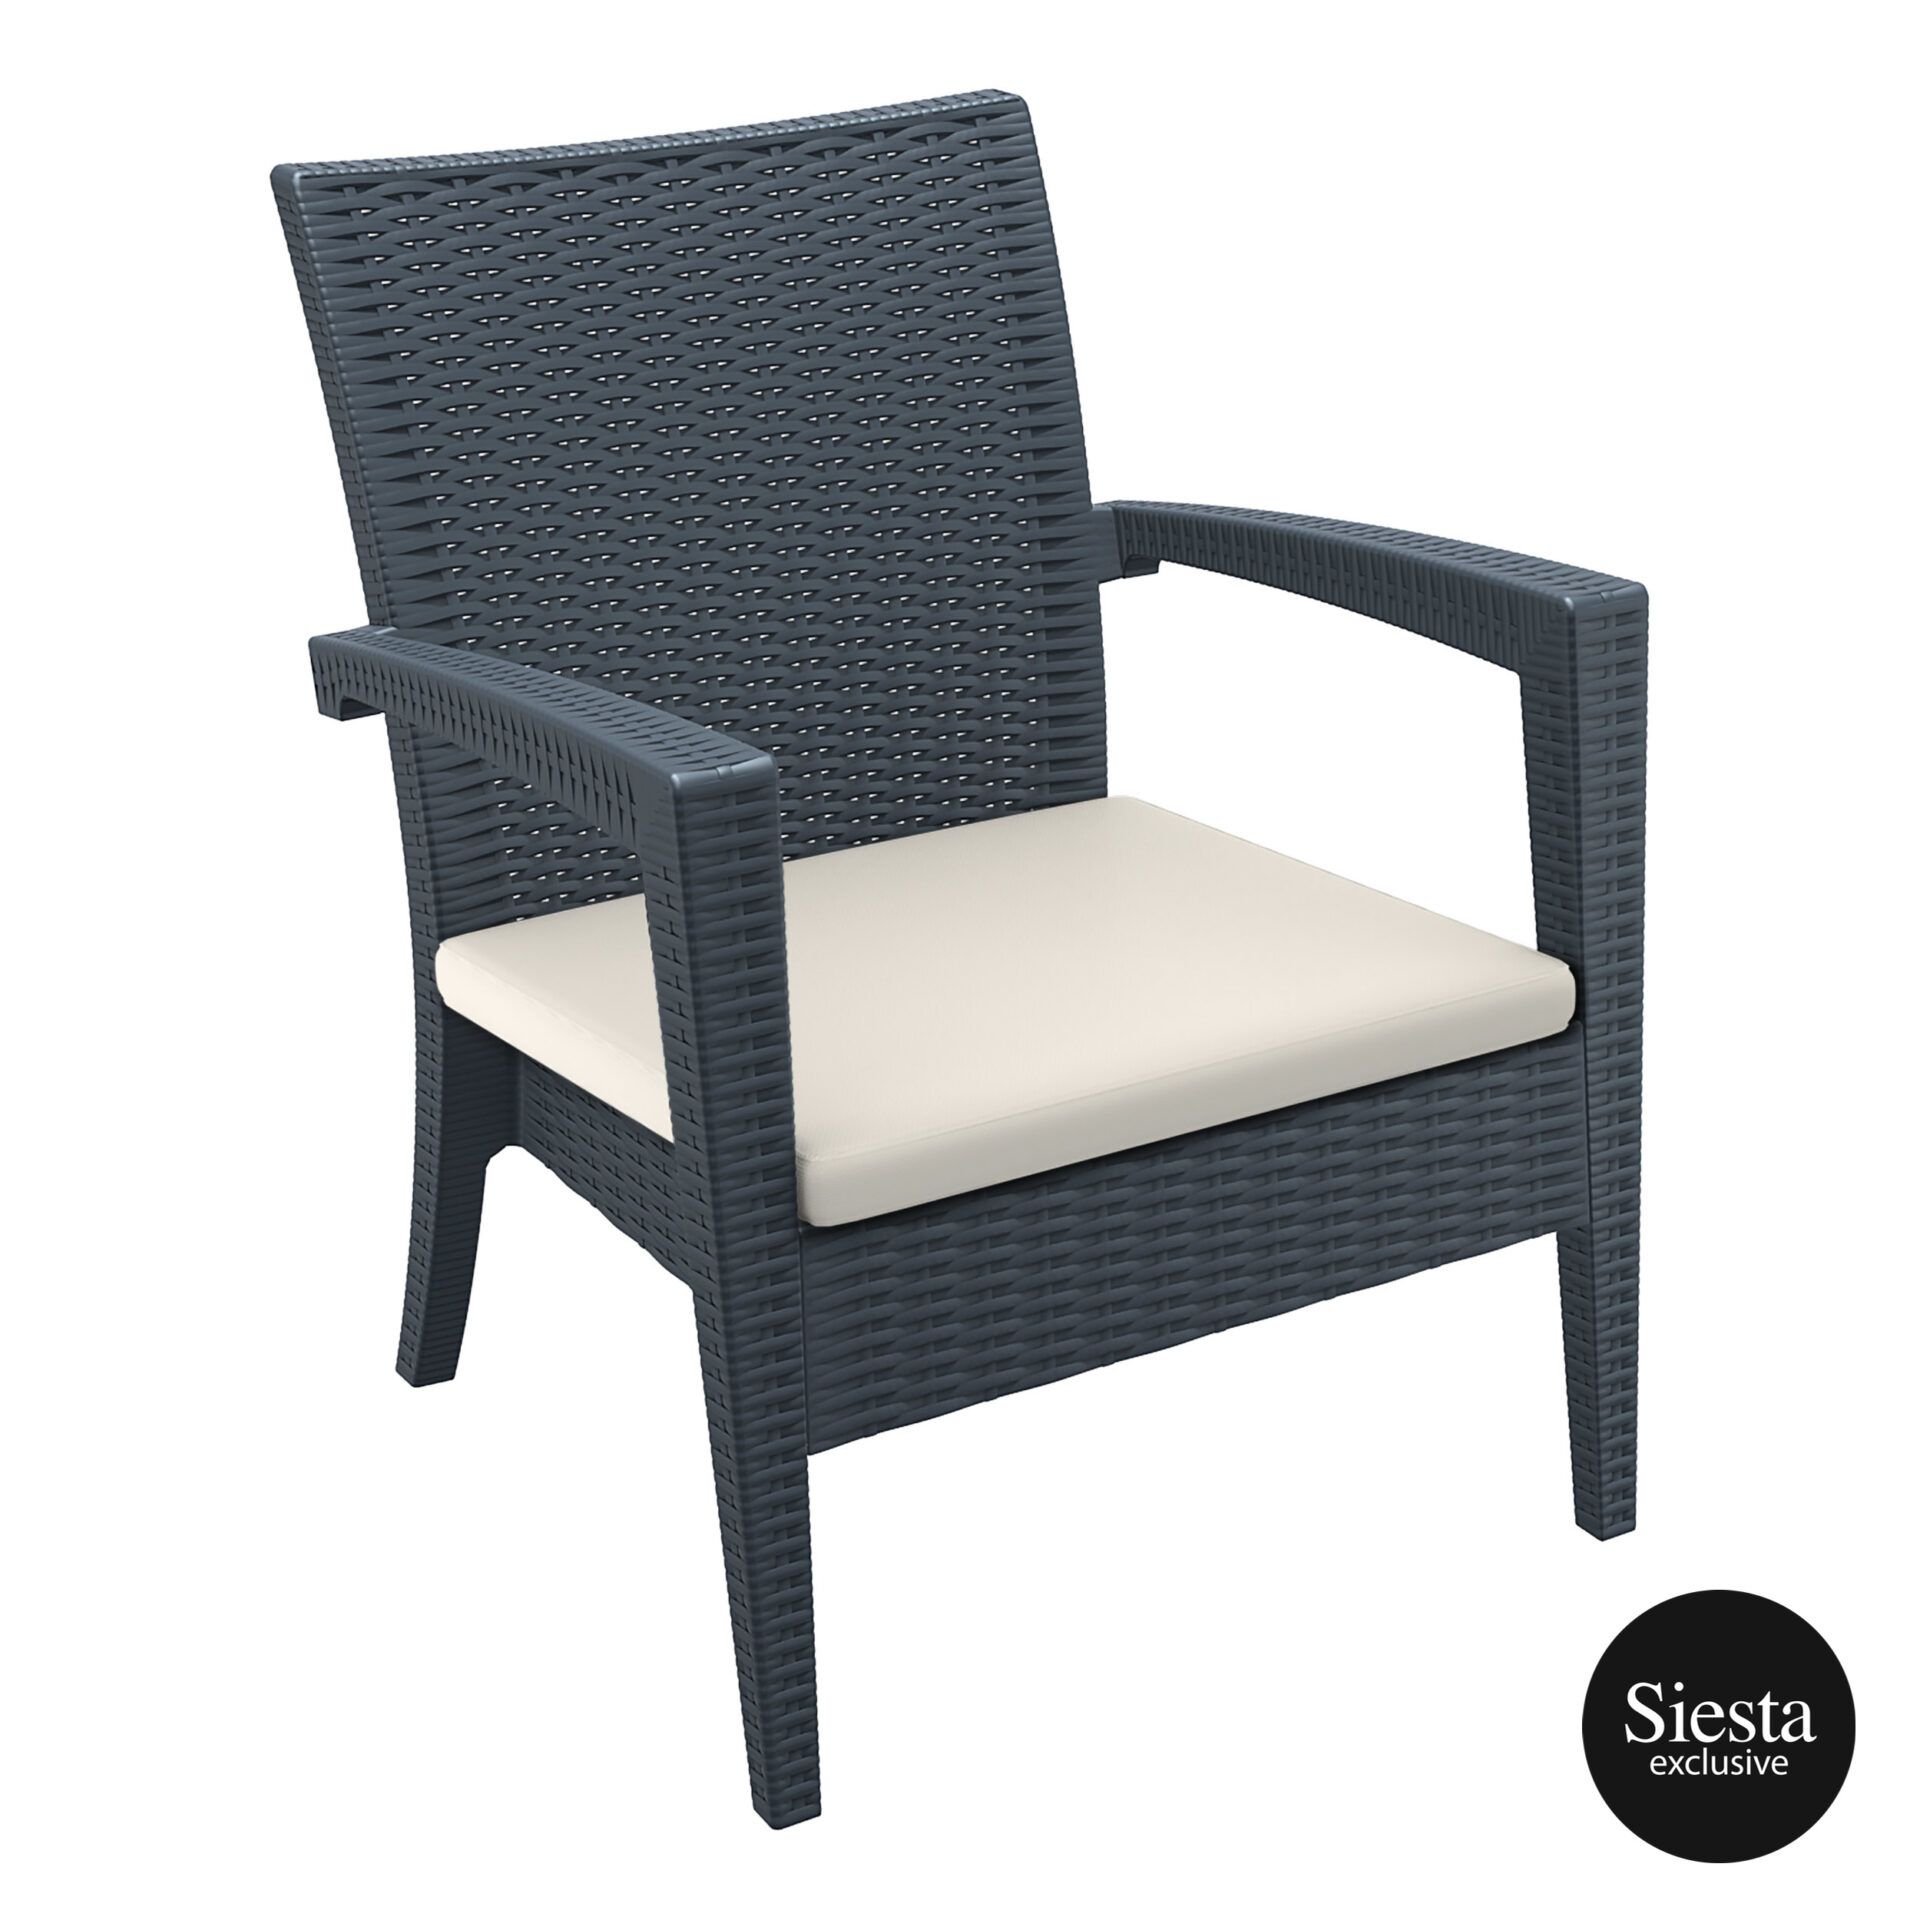 Resin Rattan Miami Tequila Lounge armchair cushion darkgrey front side